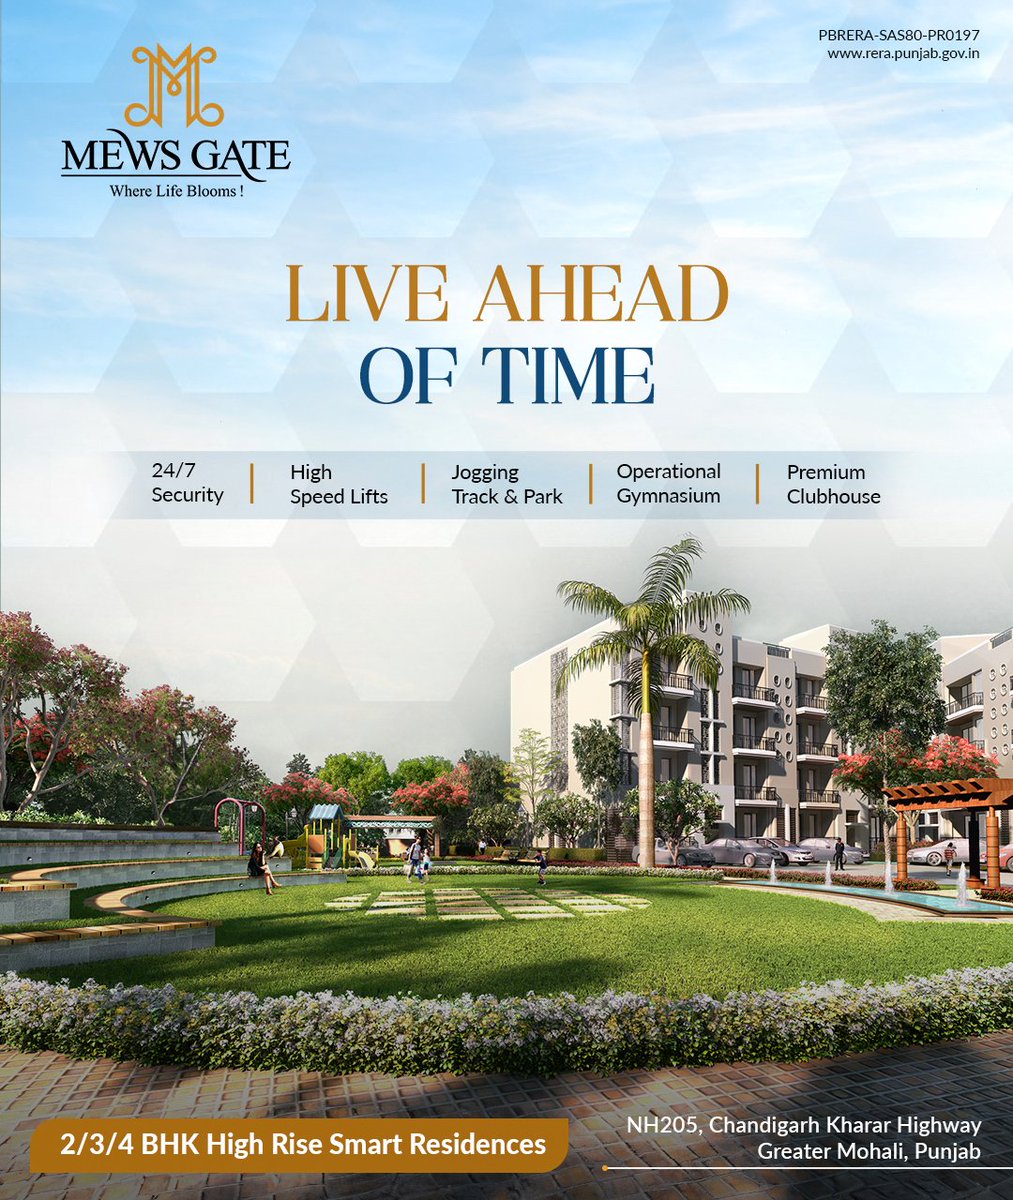 Live ahead of time with state-of-the-art amenities and timeless elegance. 🏠2/3/4 BHK Alexa-Operated Smart Residences at Mews Gate 📍NH 205, Chandigarh Kharar Highway Greater Mohali, Punjab ↘️Call us at 90695-90695 #MewsGate #PrimeLocation #smartresidences #Kharar #Mohali